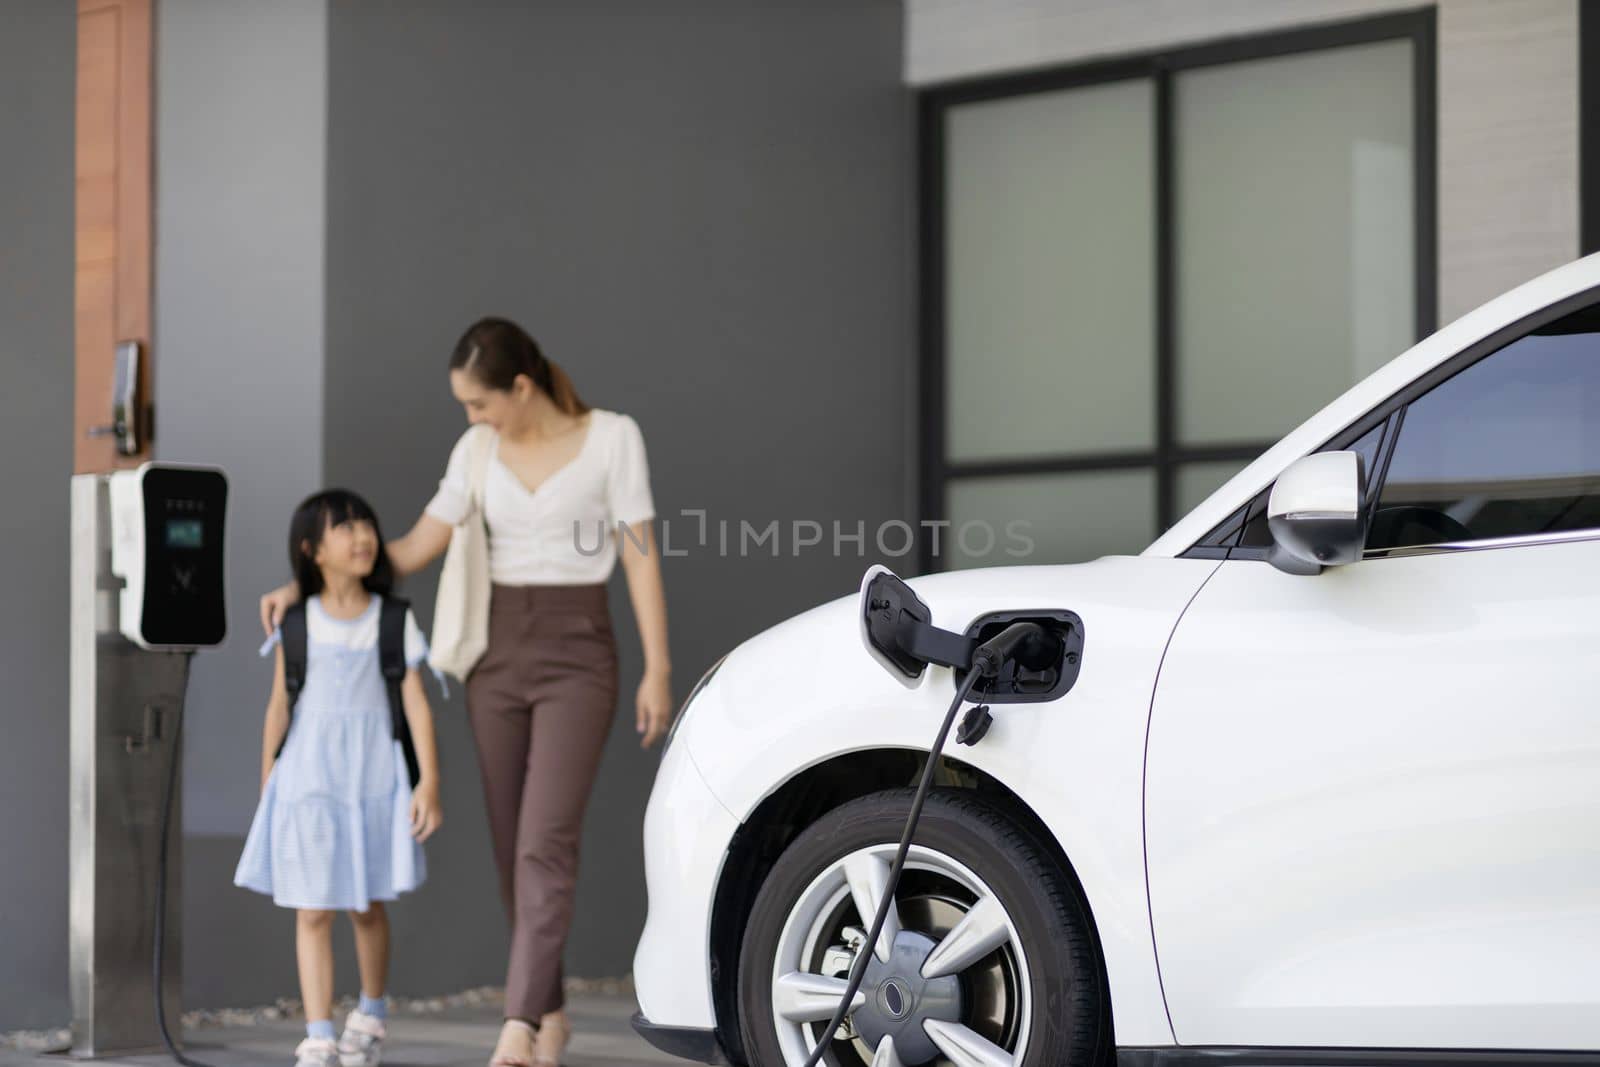 Focus EV car recharging at home charging station with blurred progressive woman and young girl in background for alternative clean energy technology concept for renewable electric vehicle.